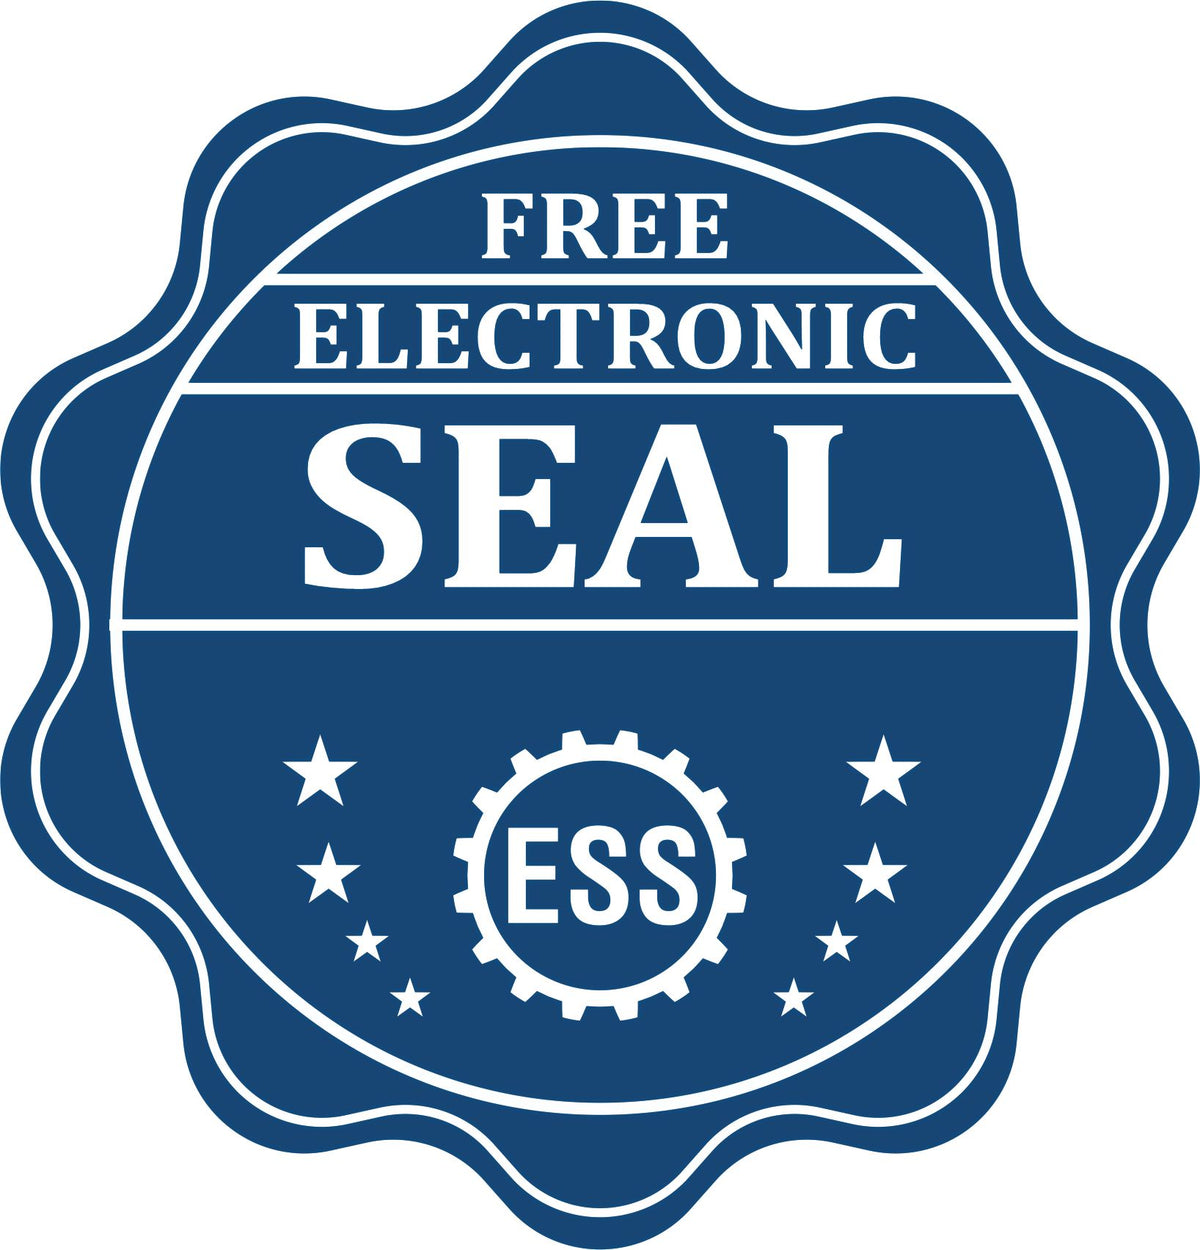 A badge showing a free electronic seal for the Handheld North Dakota Architect Seal Embosser with stars and the ESS gear on the emblem.